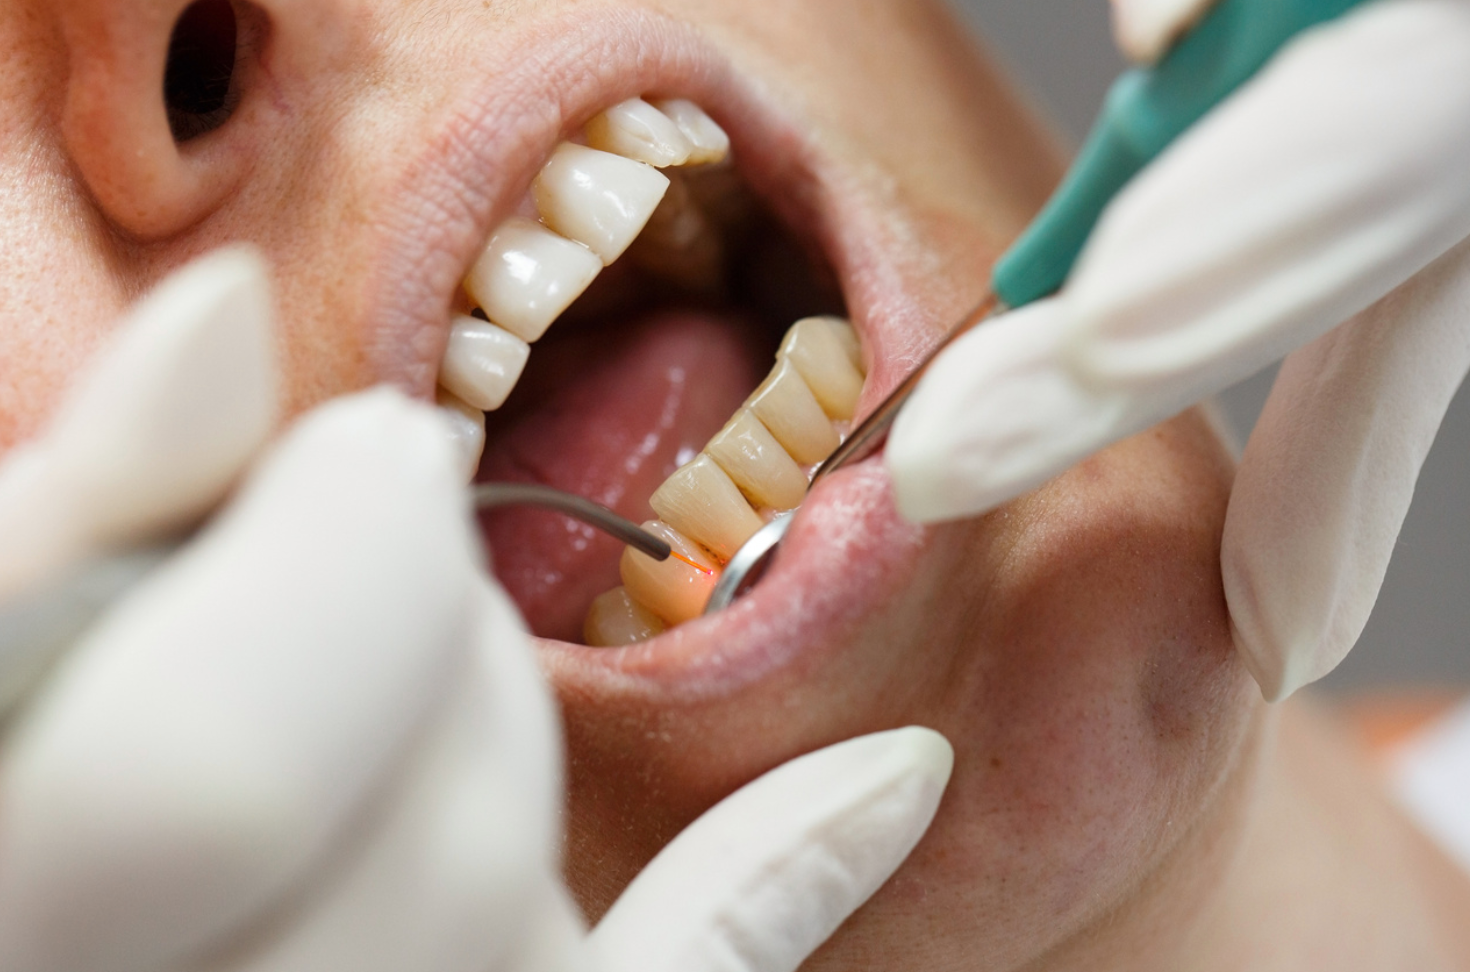 The Link Between Oral Health, General Health in Patients with Diabetes